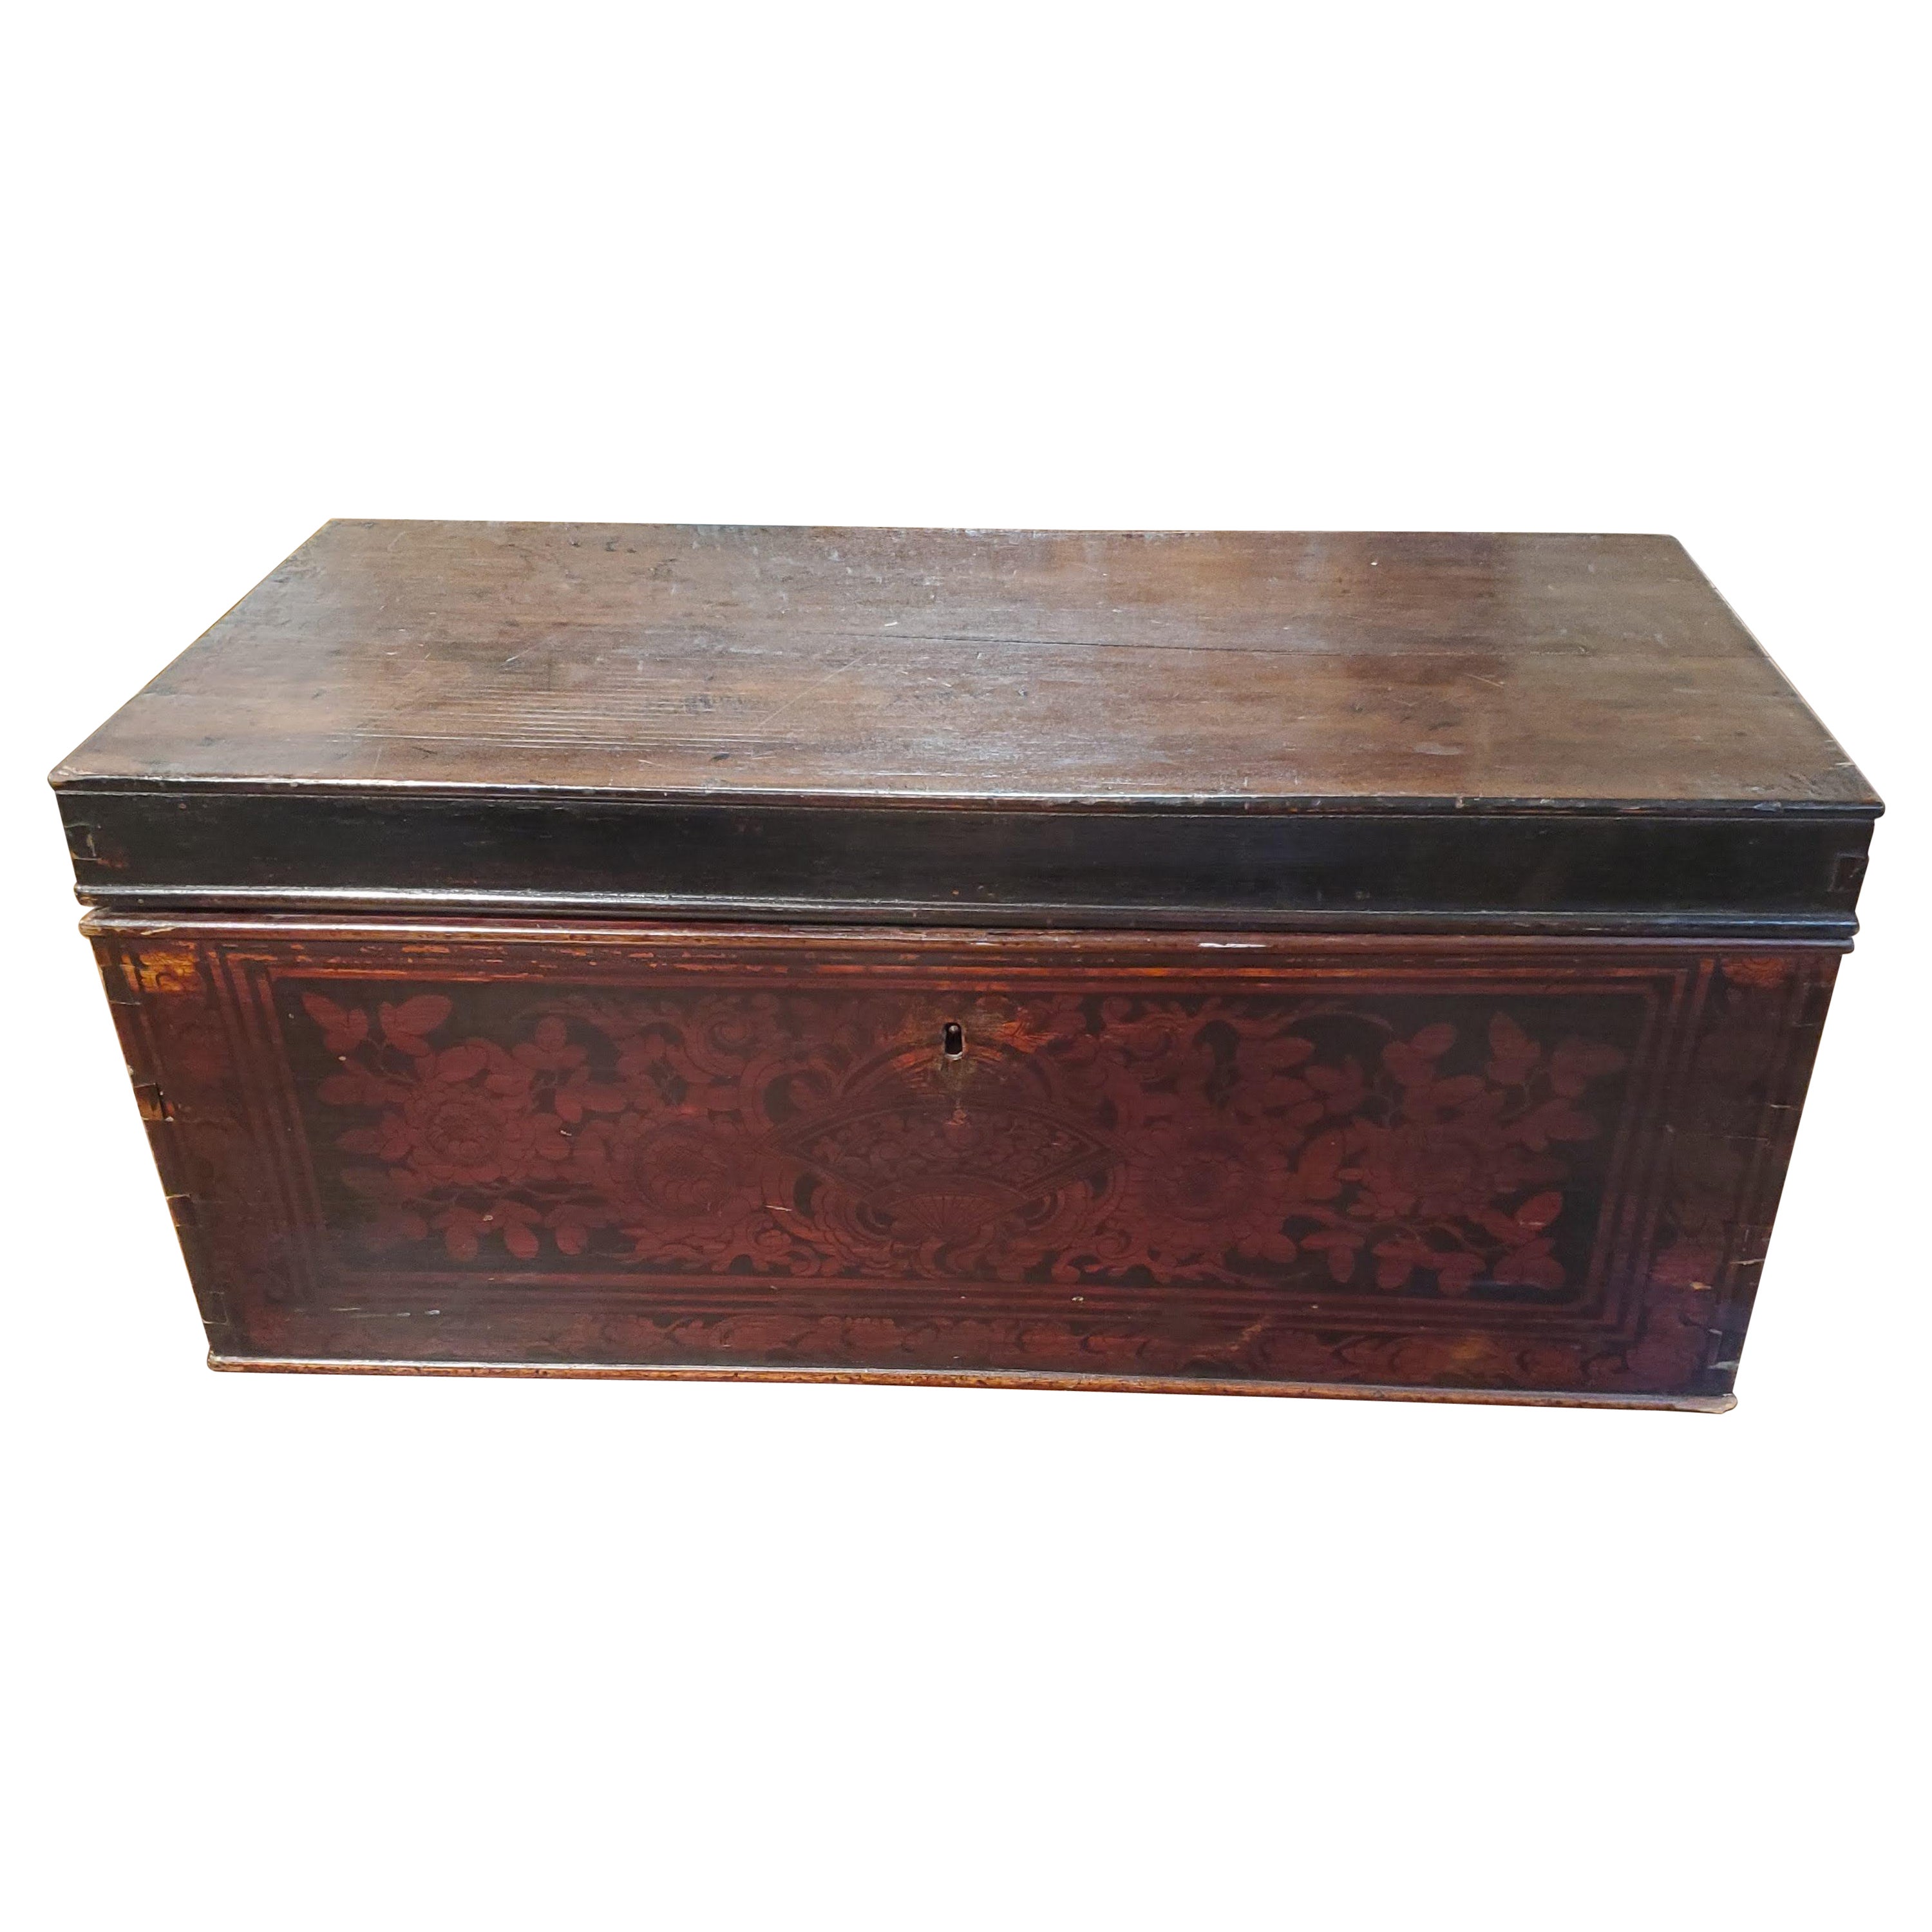 19th Century Indonesian Red and Black Lacquered Document Box with Brass Handles